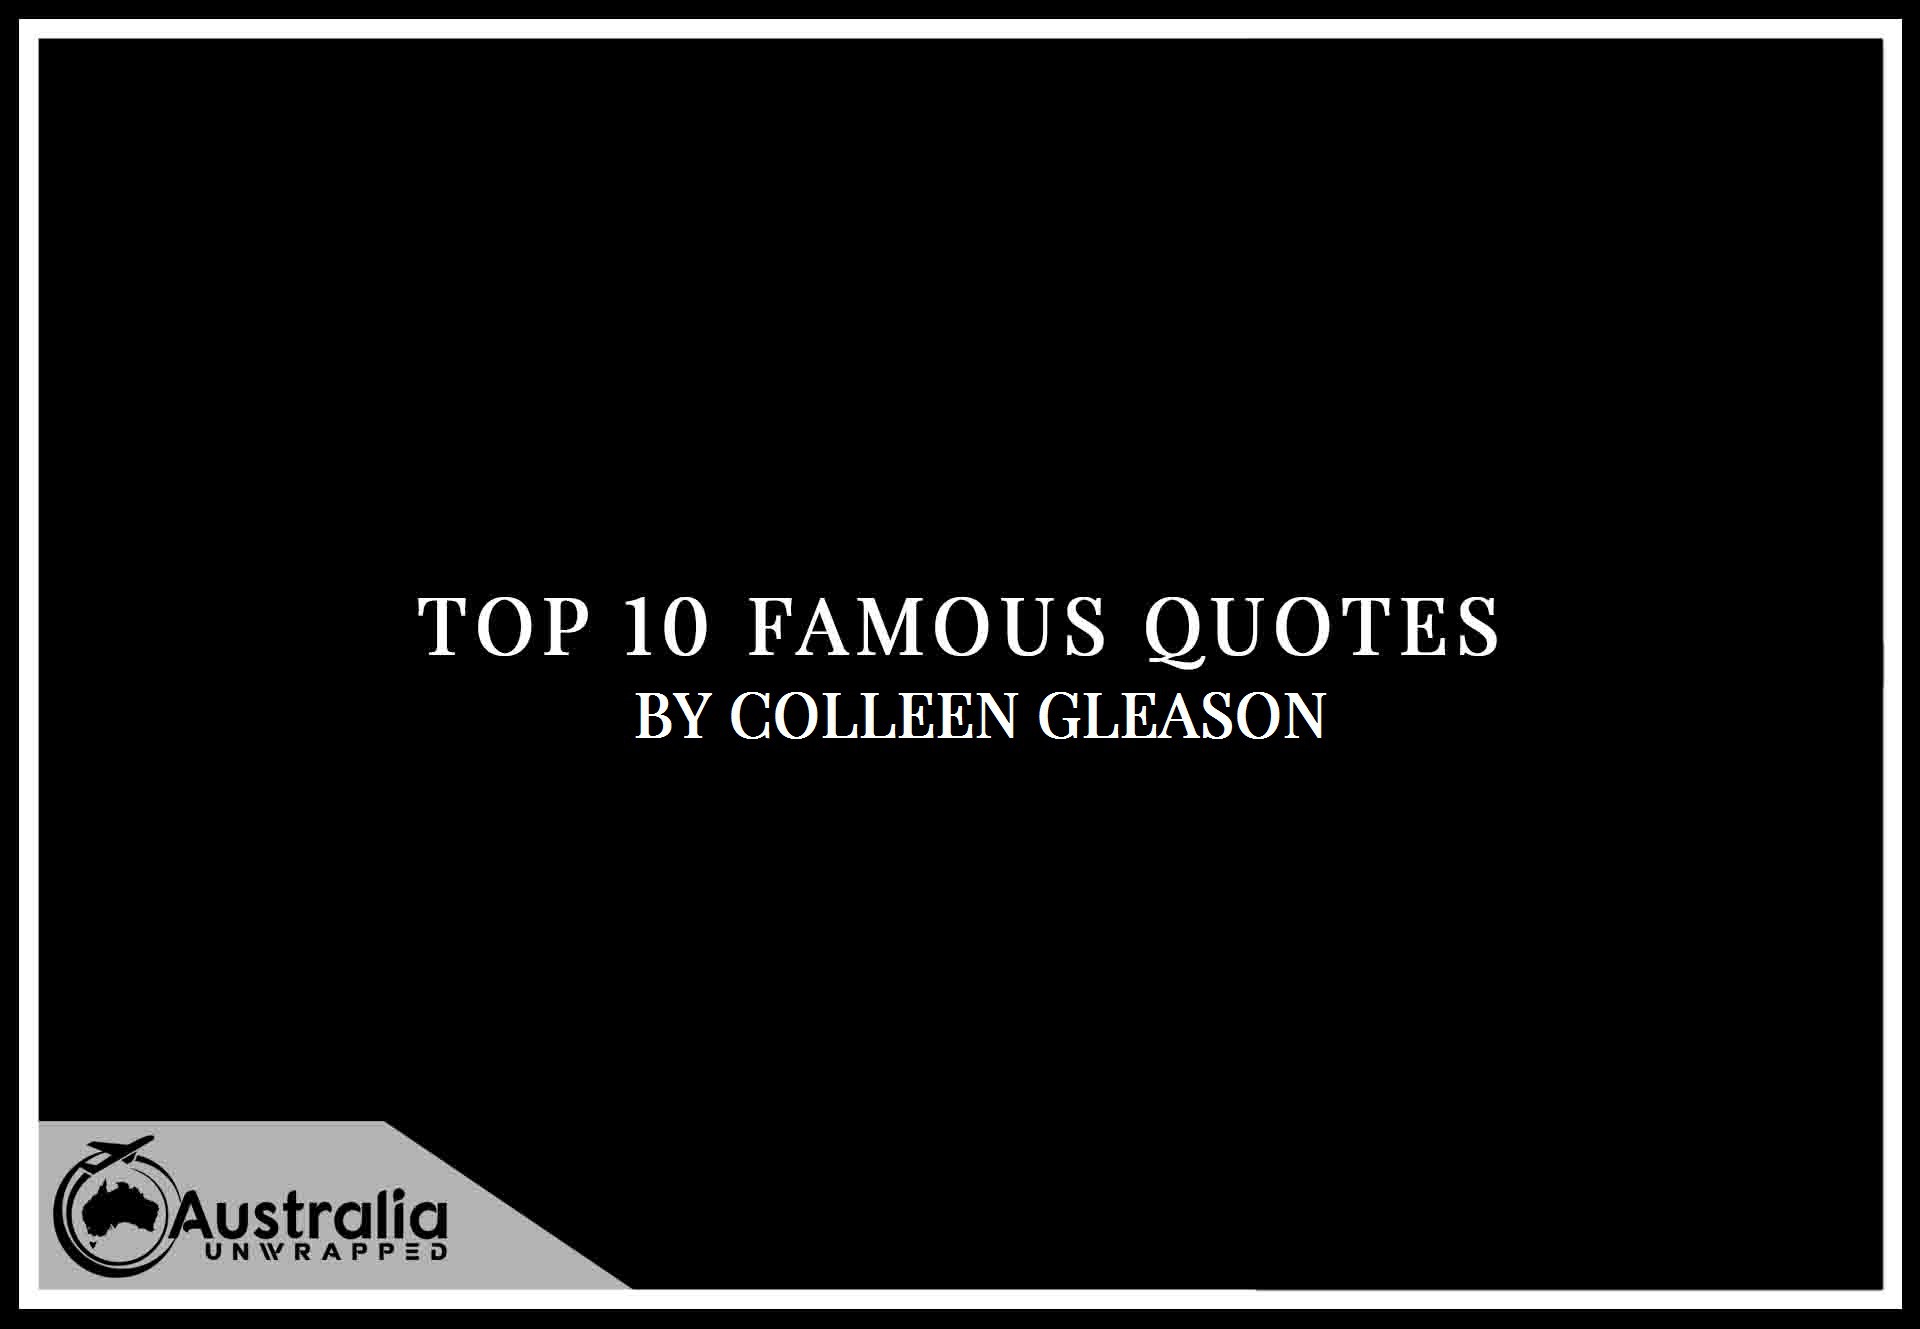 Colleen Gleason’s Top 10 Popular and Famous Quotes